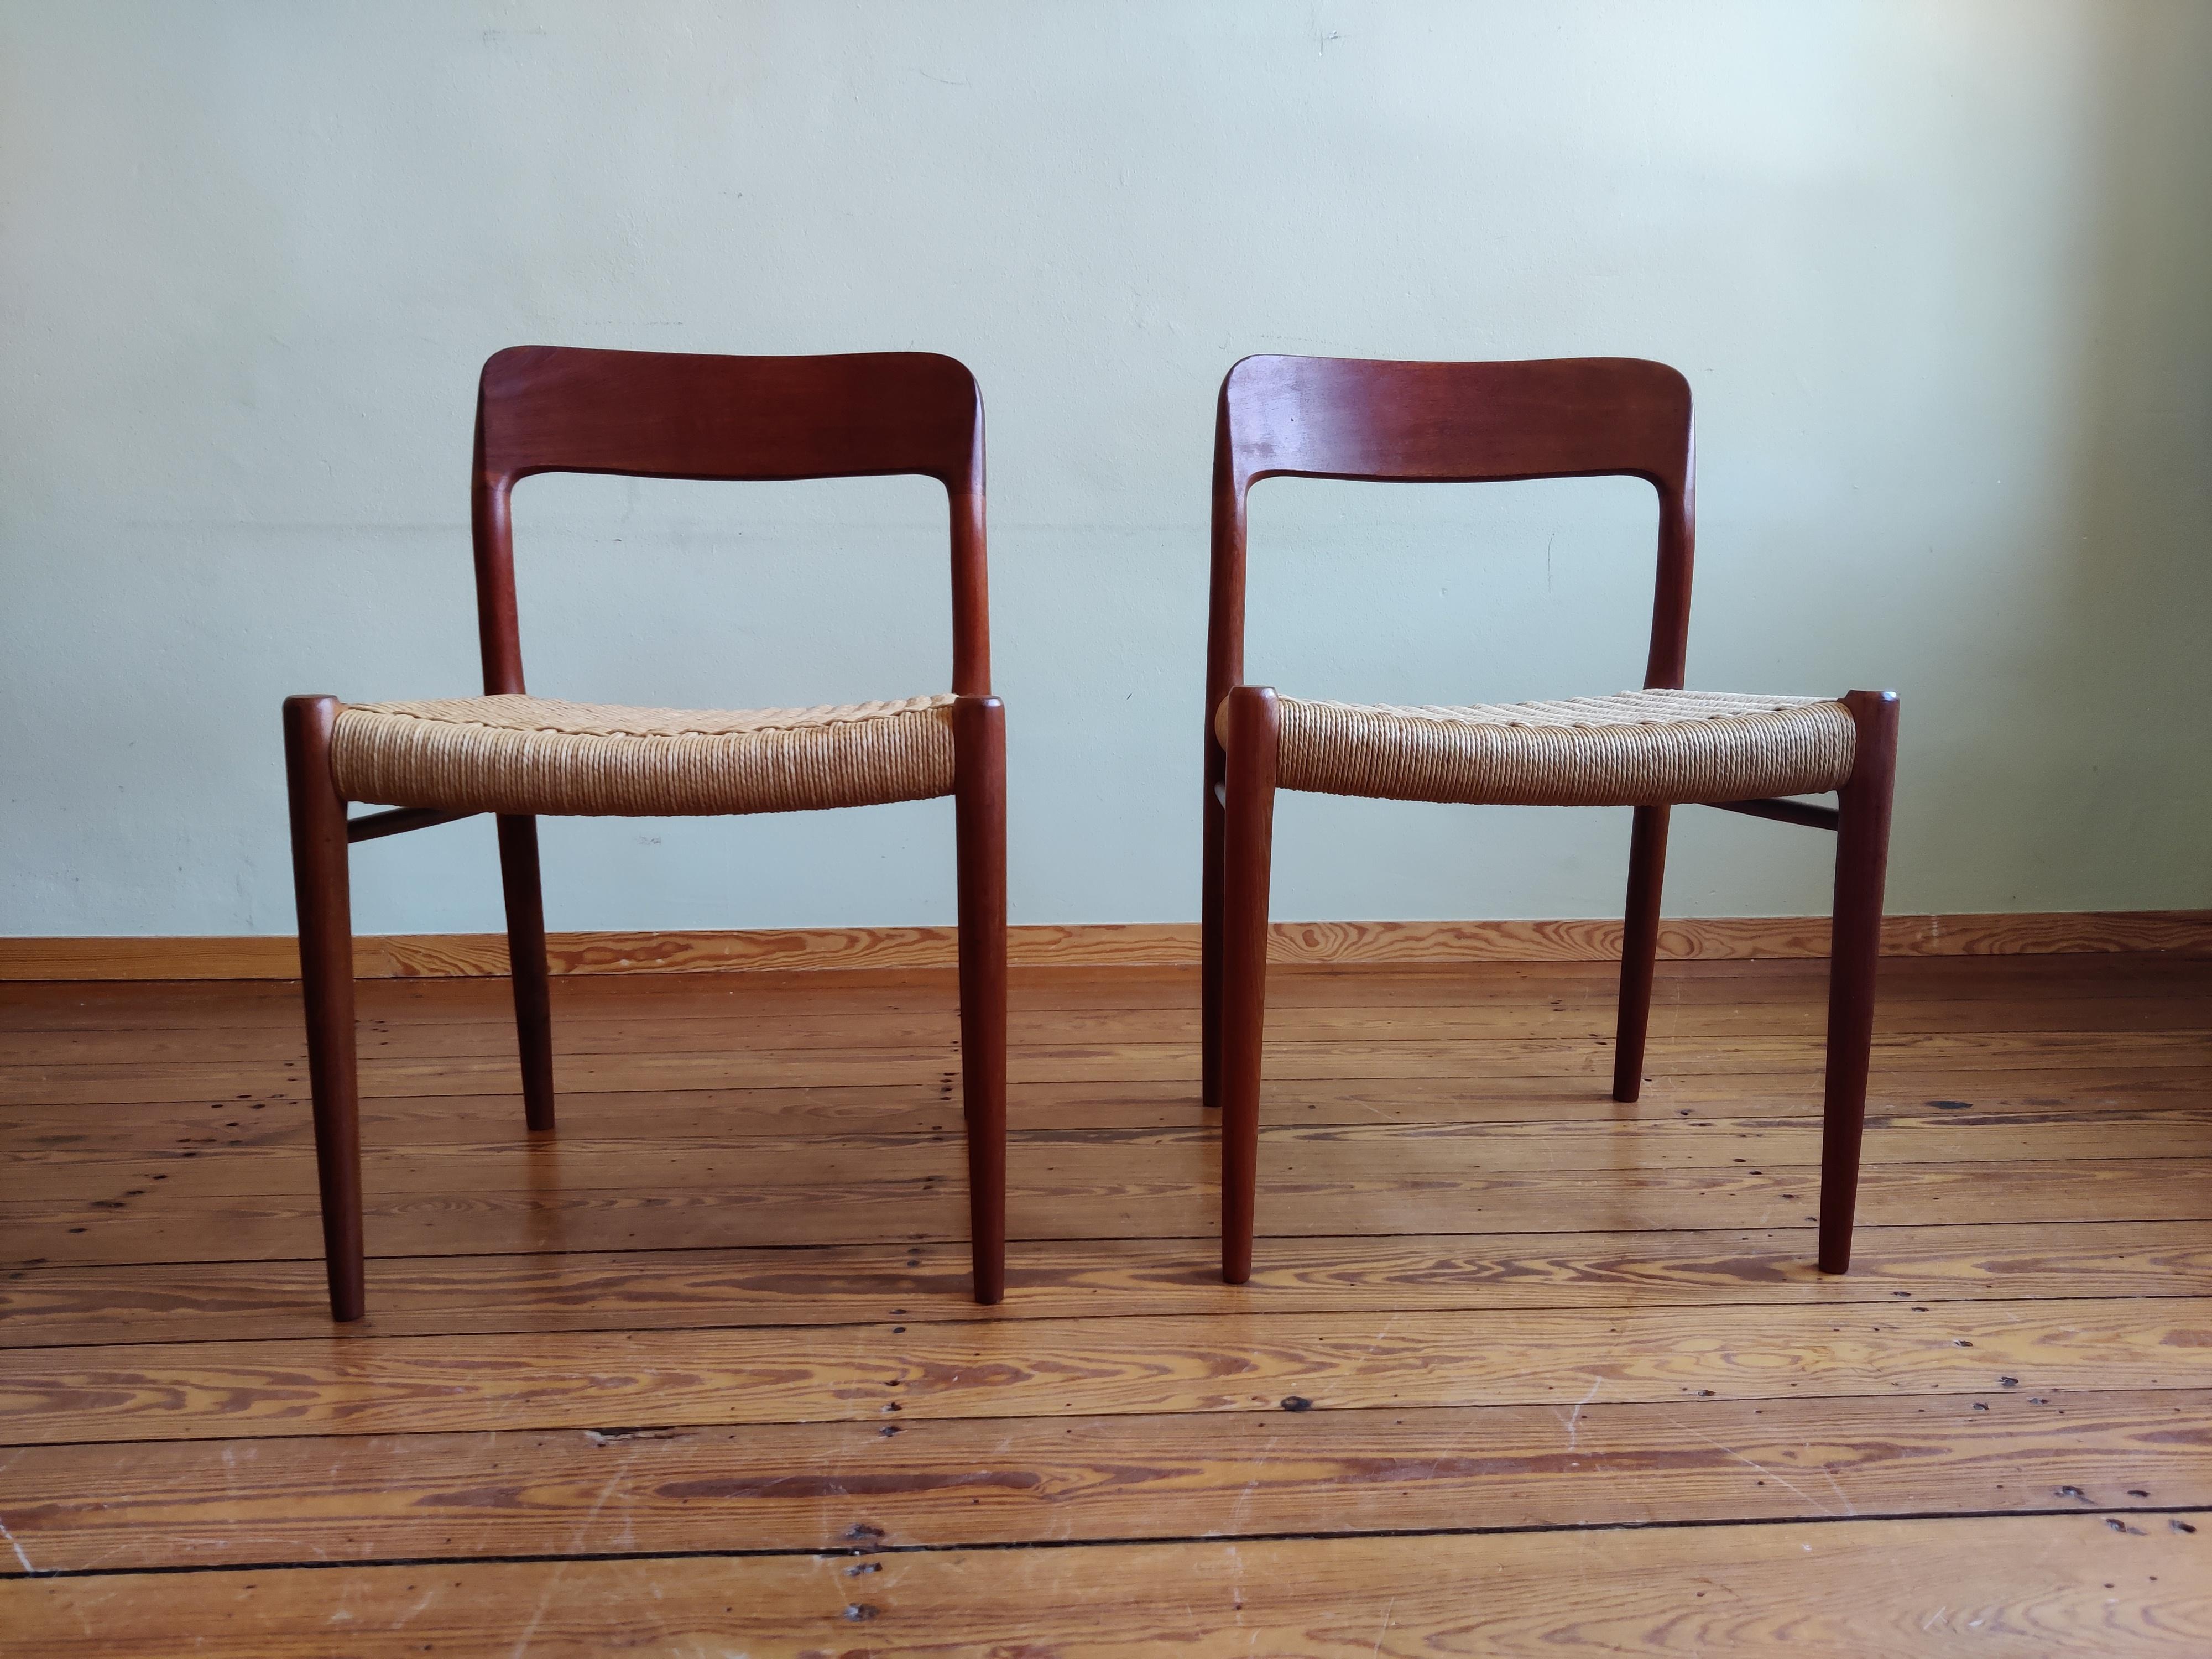 Set of four Danish dining chairs by Niels Otto Mølller.
The chairs with the model number 75 date from the 1950s and have the manufacturer stamped on the underside.
The chair frame is made of teak and the seat is made of paper cord.

Chair